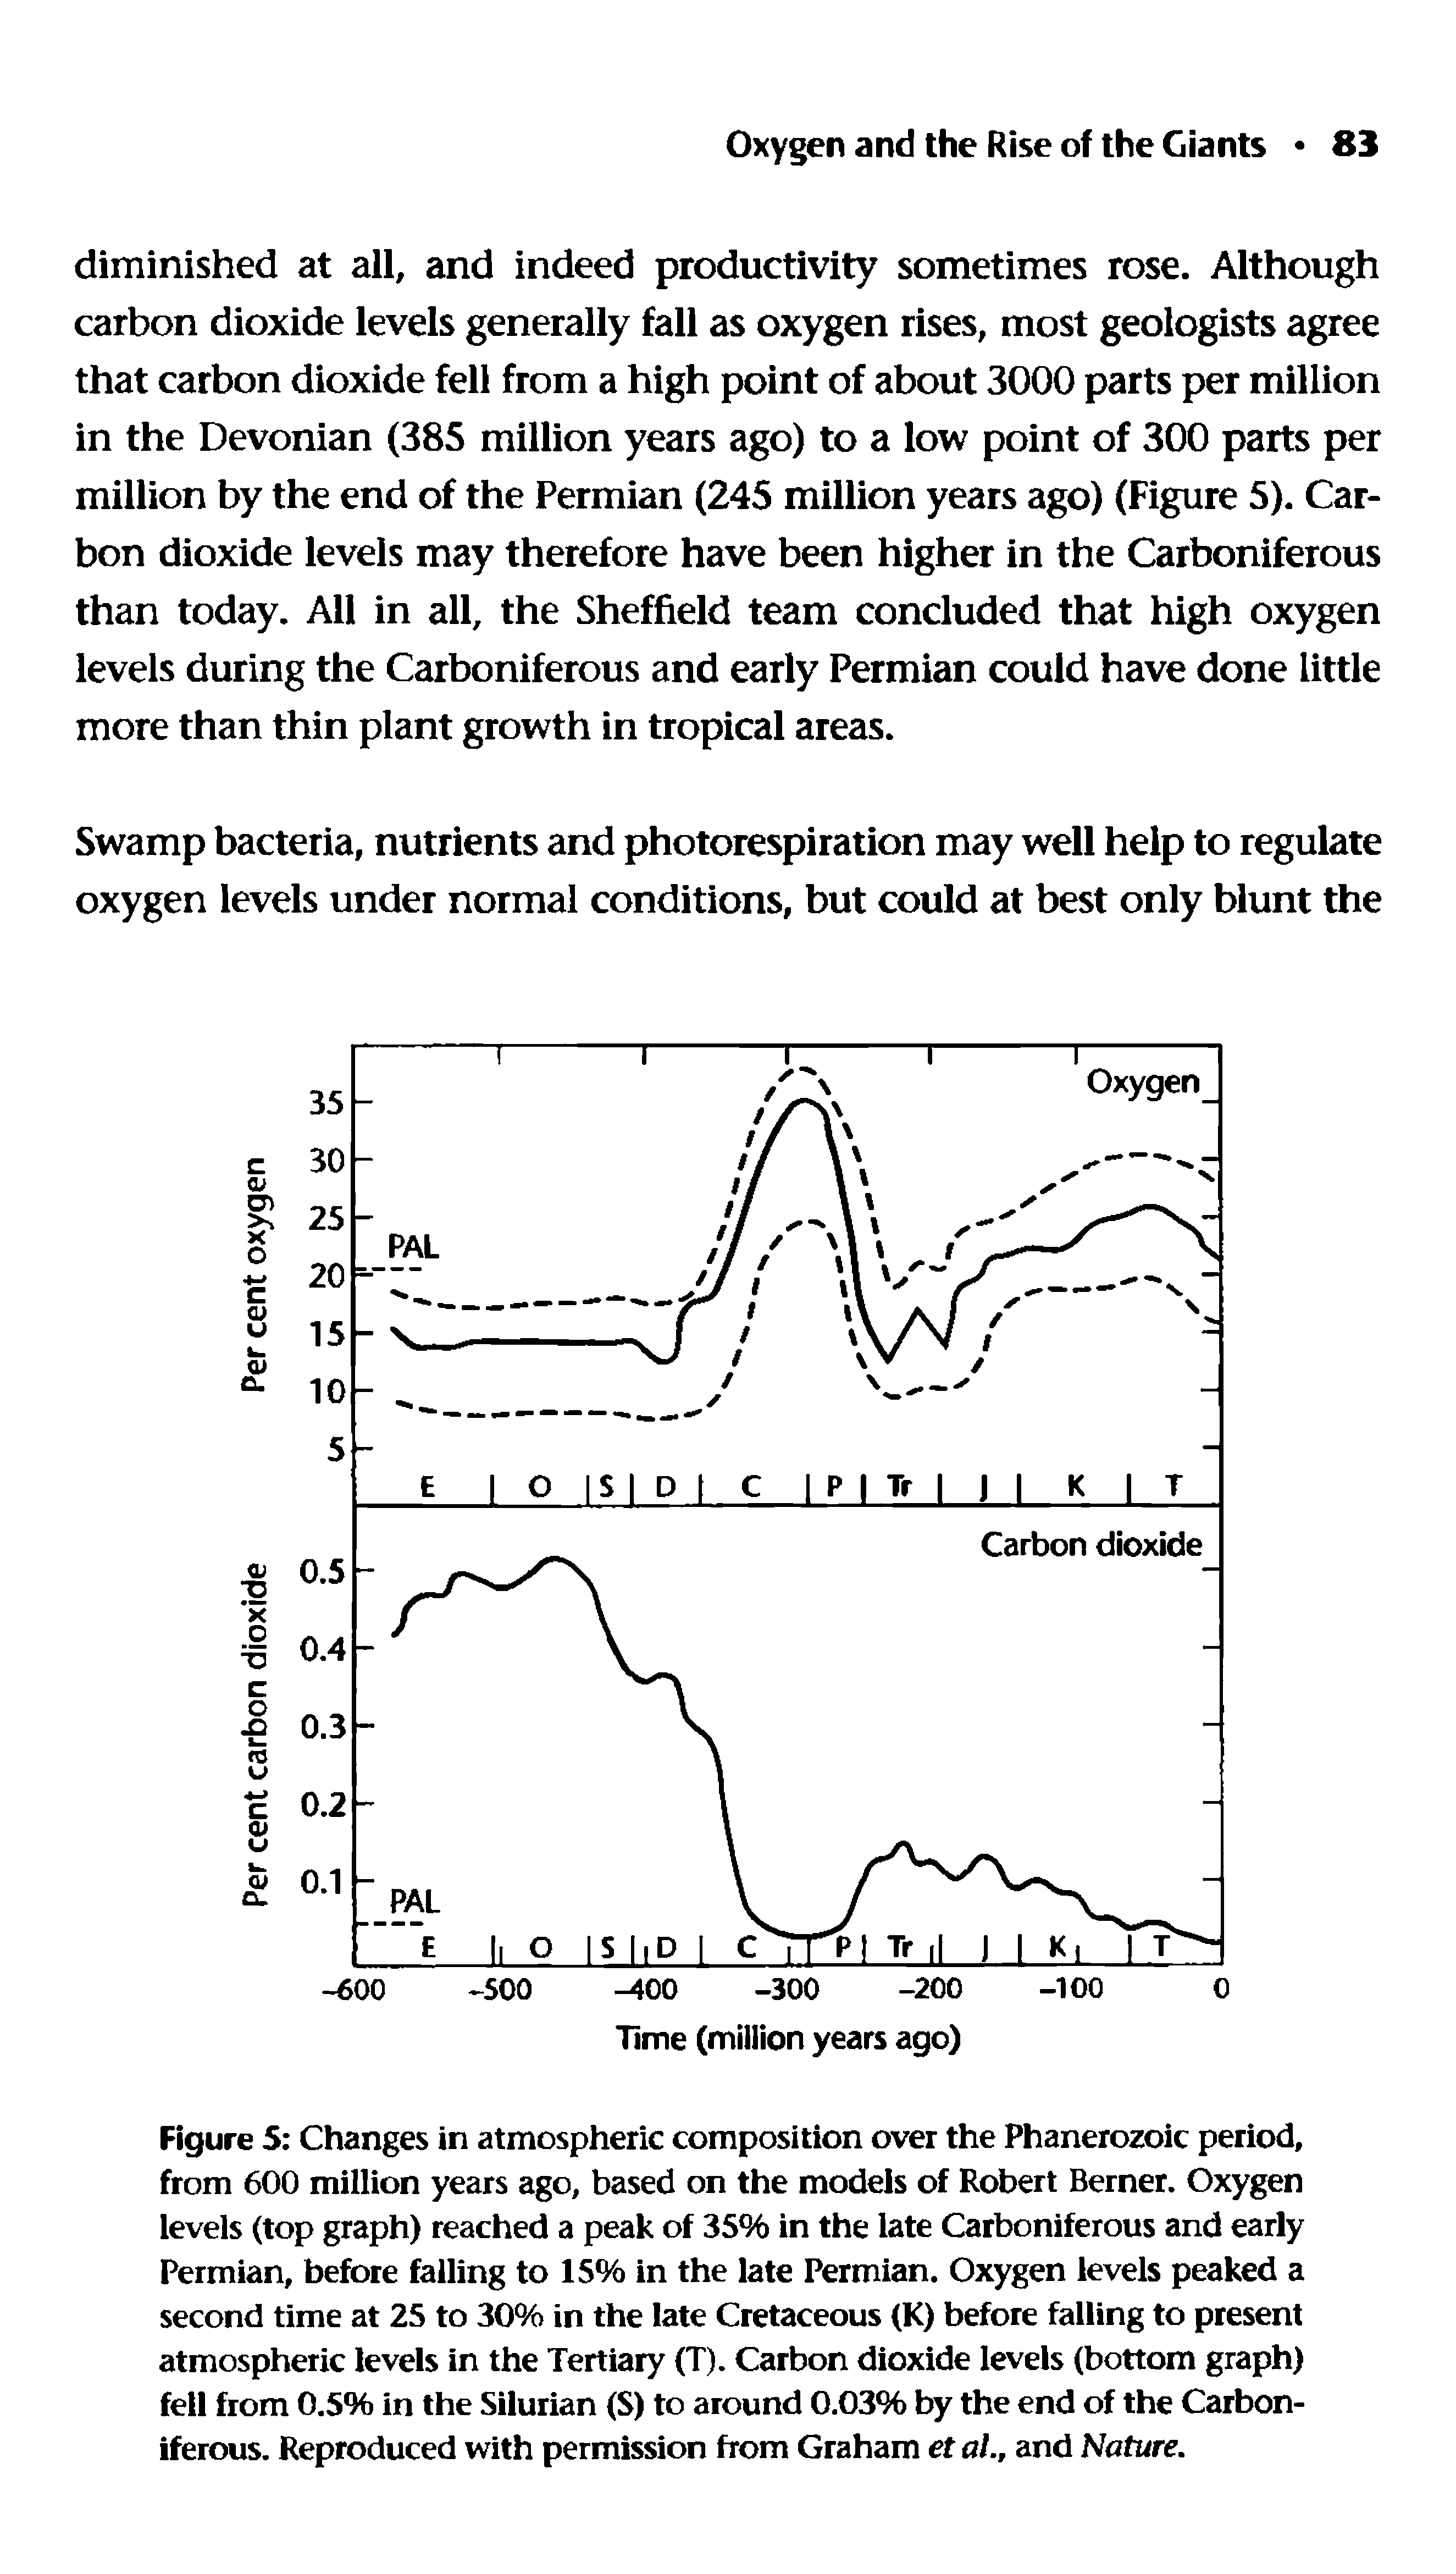 Figure 5 Changes in atmospheric composition over the Phanerozoic period, from 600 million years ago, based on the models of Robert Berner. Oxygen levels (top graph) reached a peak of 35% in the late Carboniferous and early Permian, before falling to 15% in the late Permian. Oxygen levels peaked a second time at 25 to 30% in the late Cretaceous (K) before falling to present atmospheric levels in the Tertiary (T). Carbon dioxide levels (bottom graph) fell from 0.5% in the Silurian (S) to around 0.03% by the end of the Carboniferous. Reproduced with permission from Graham et al.t and Nature.